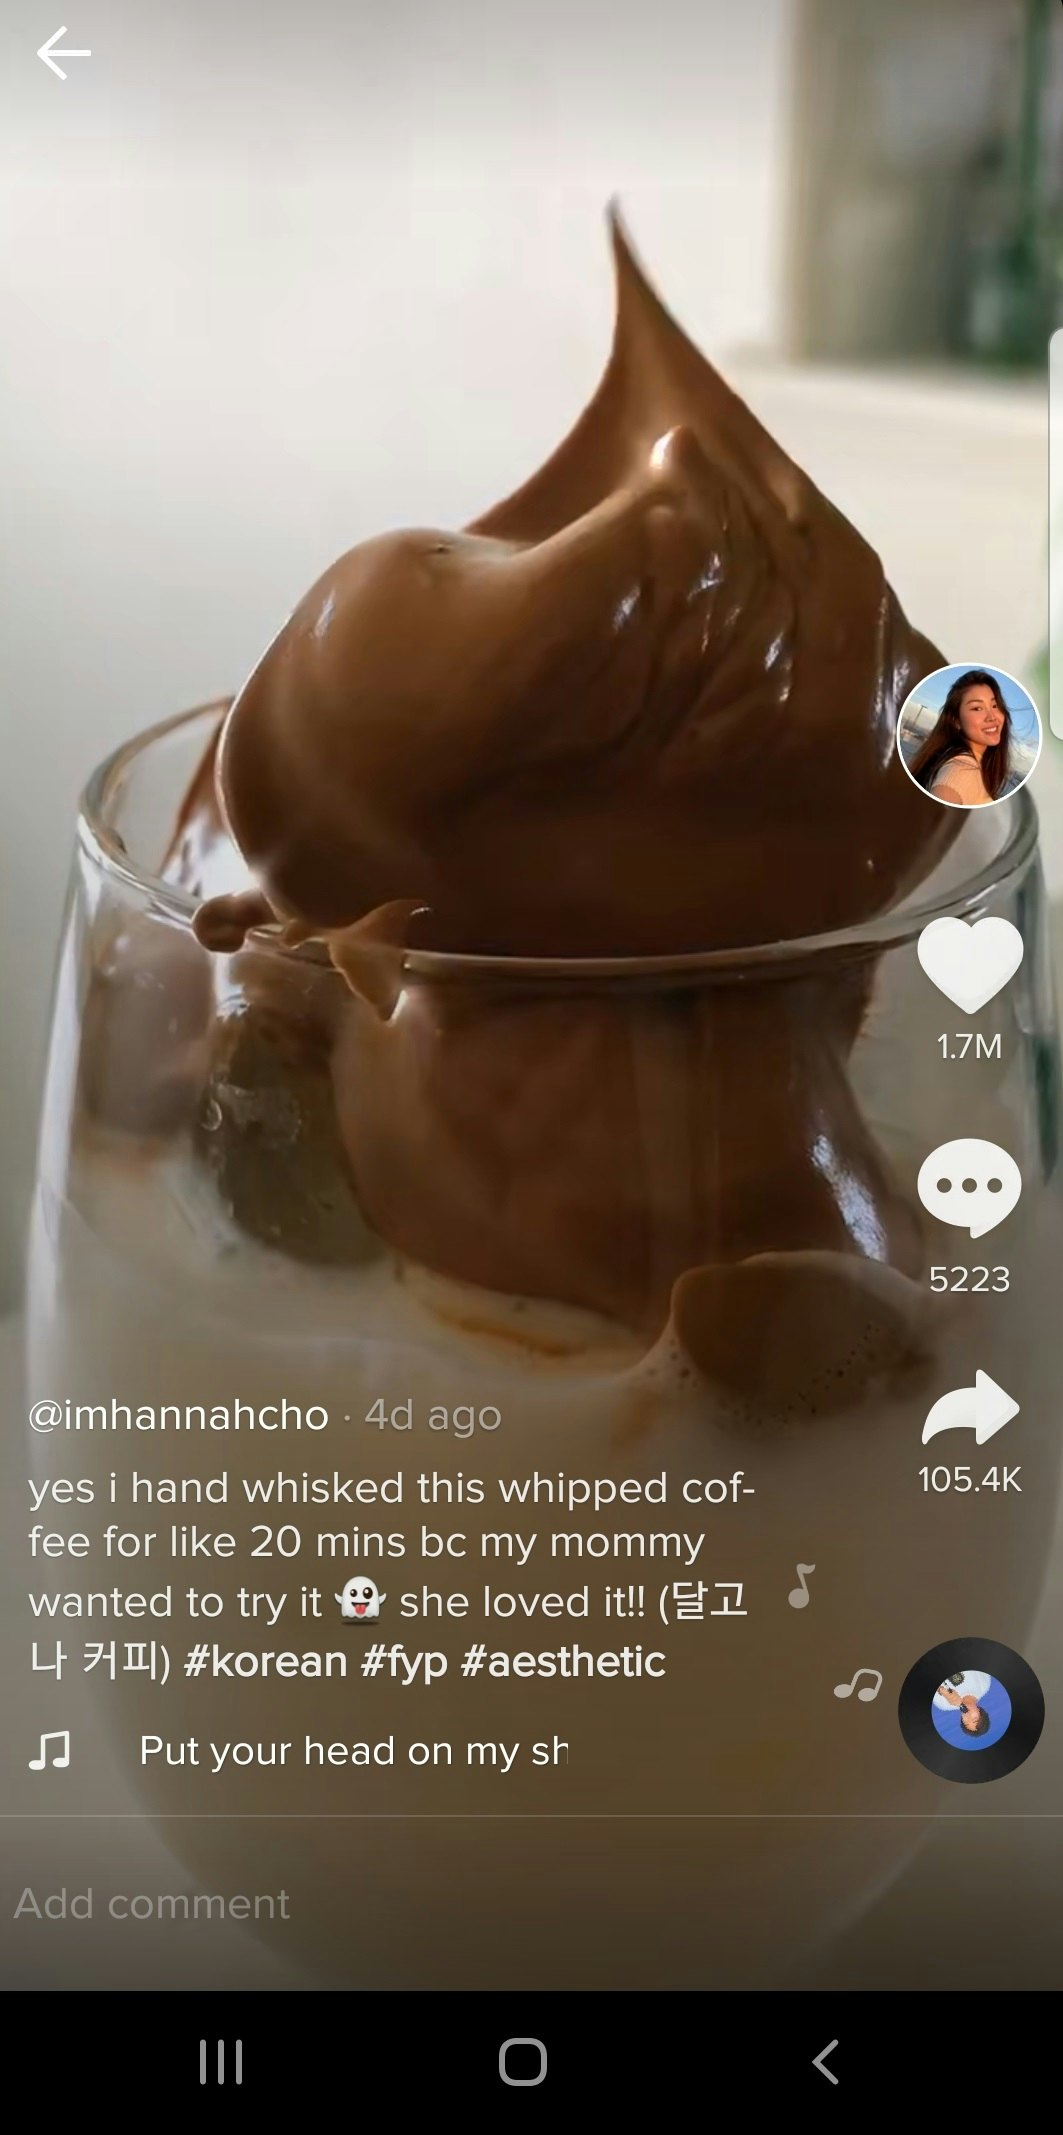 This Whipped Coffee Recipe From TikTok Is A Luxurious Sip